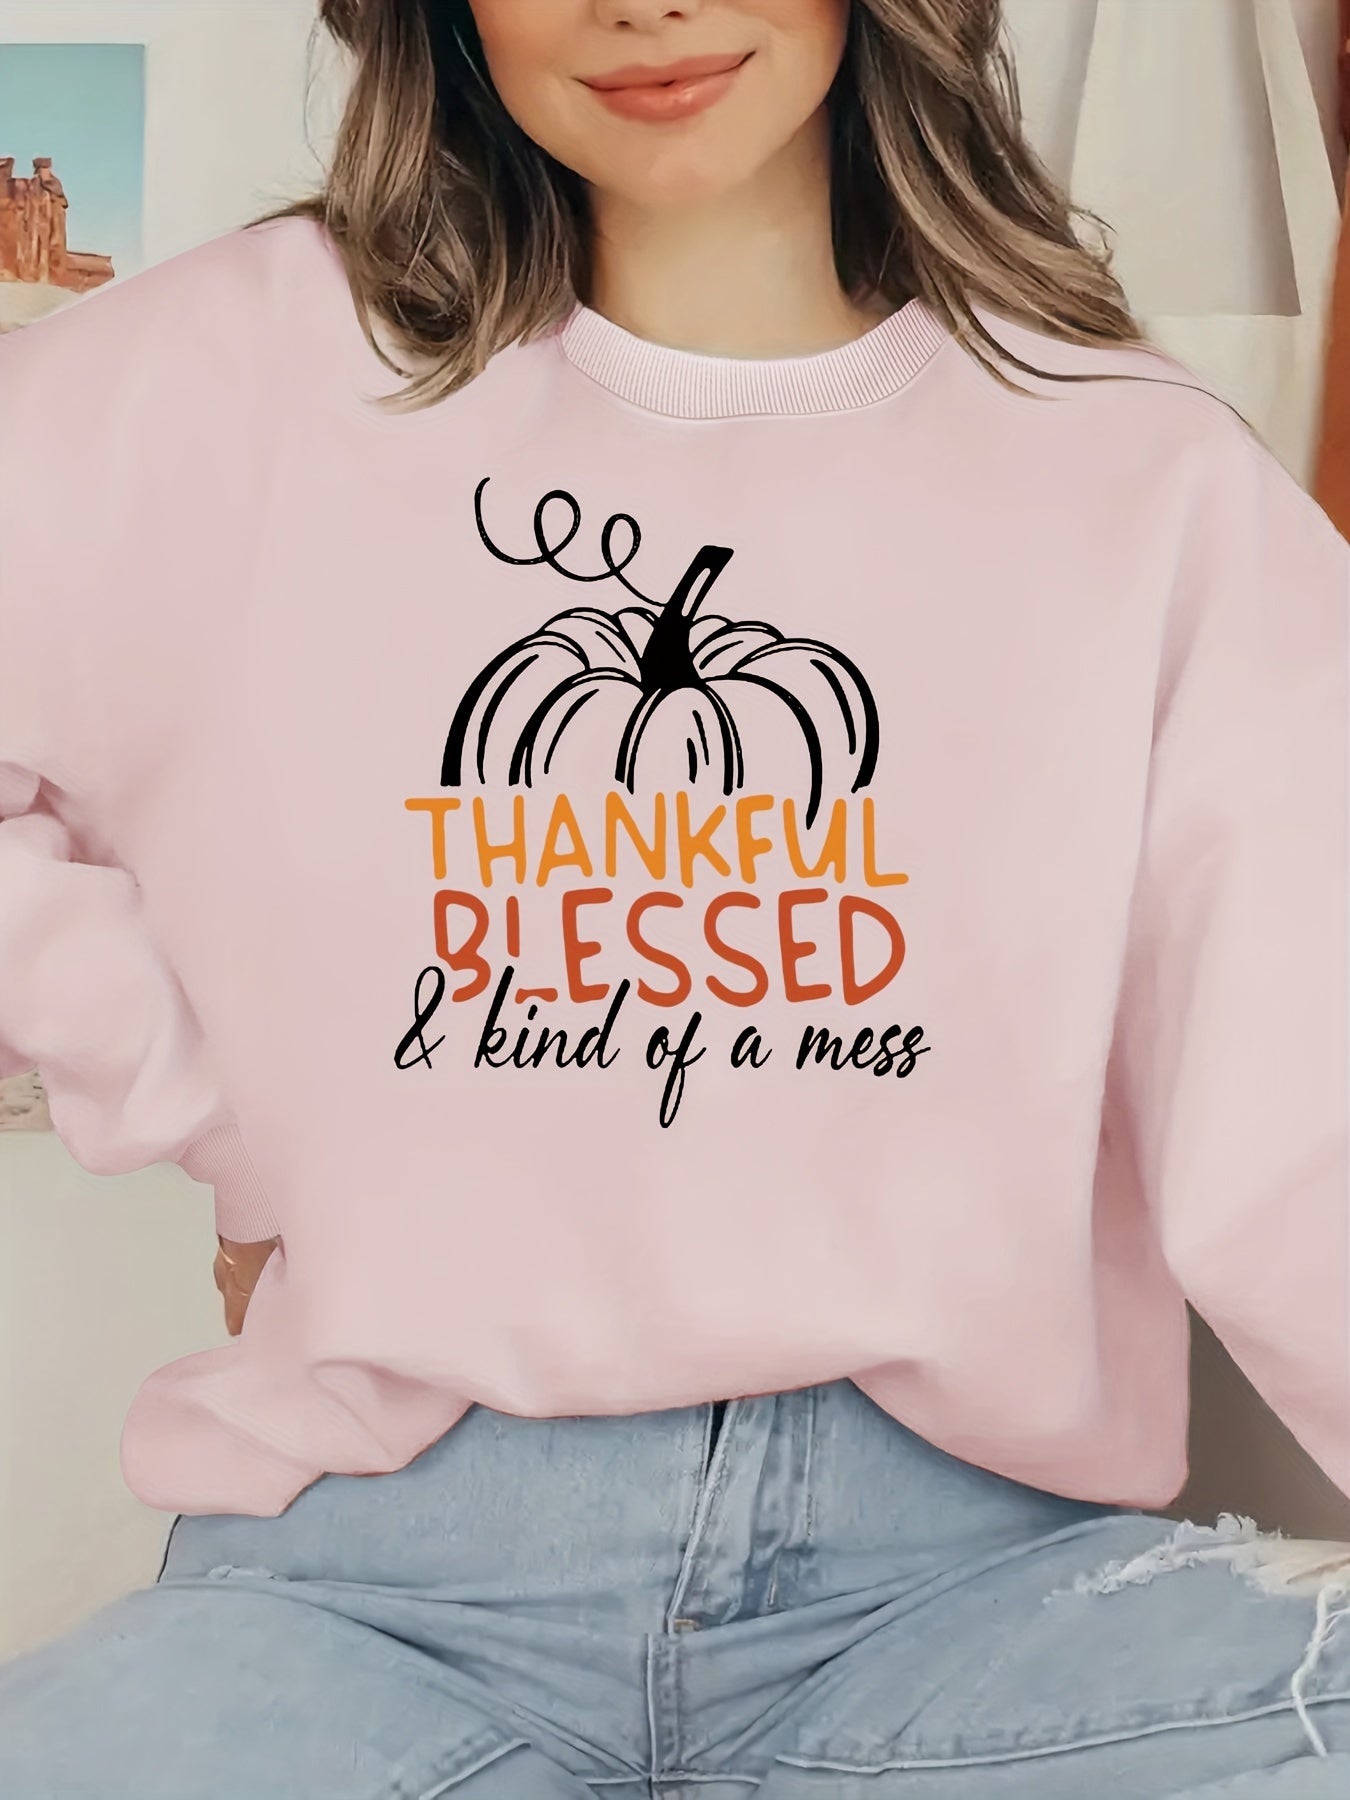 Thankful Blessed & Kind Of A Mess (thanksgiving themed) Plus Size Women's Christian Pullover Sweatshirt claimedbygoddesigns